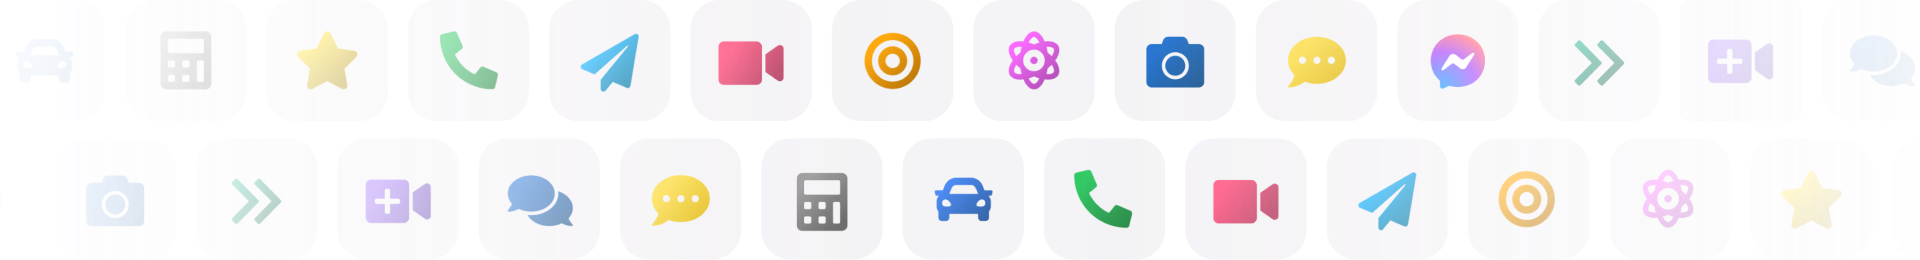 Drivecntric App Icons animating left to right